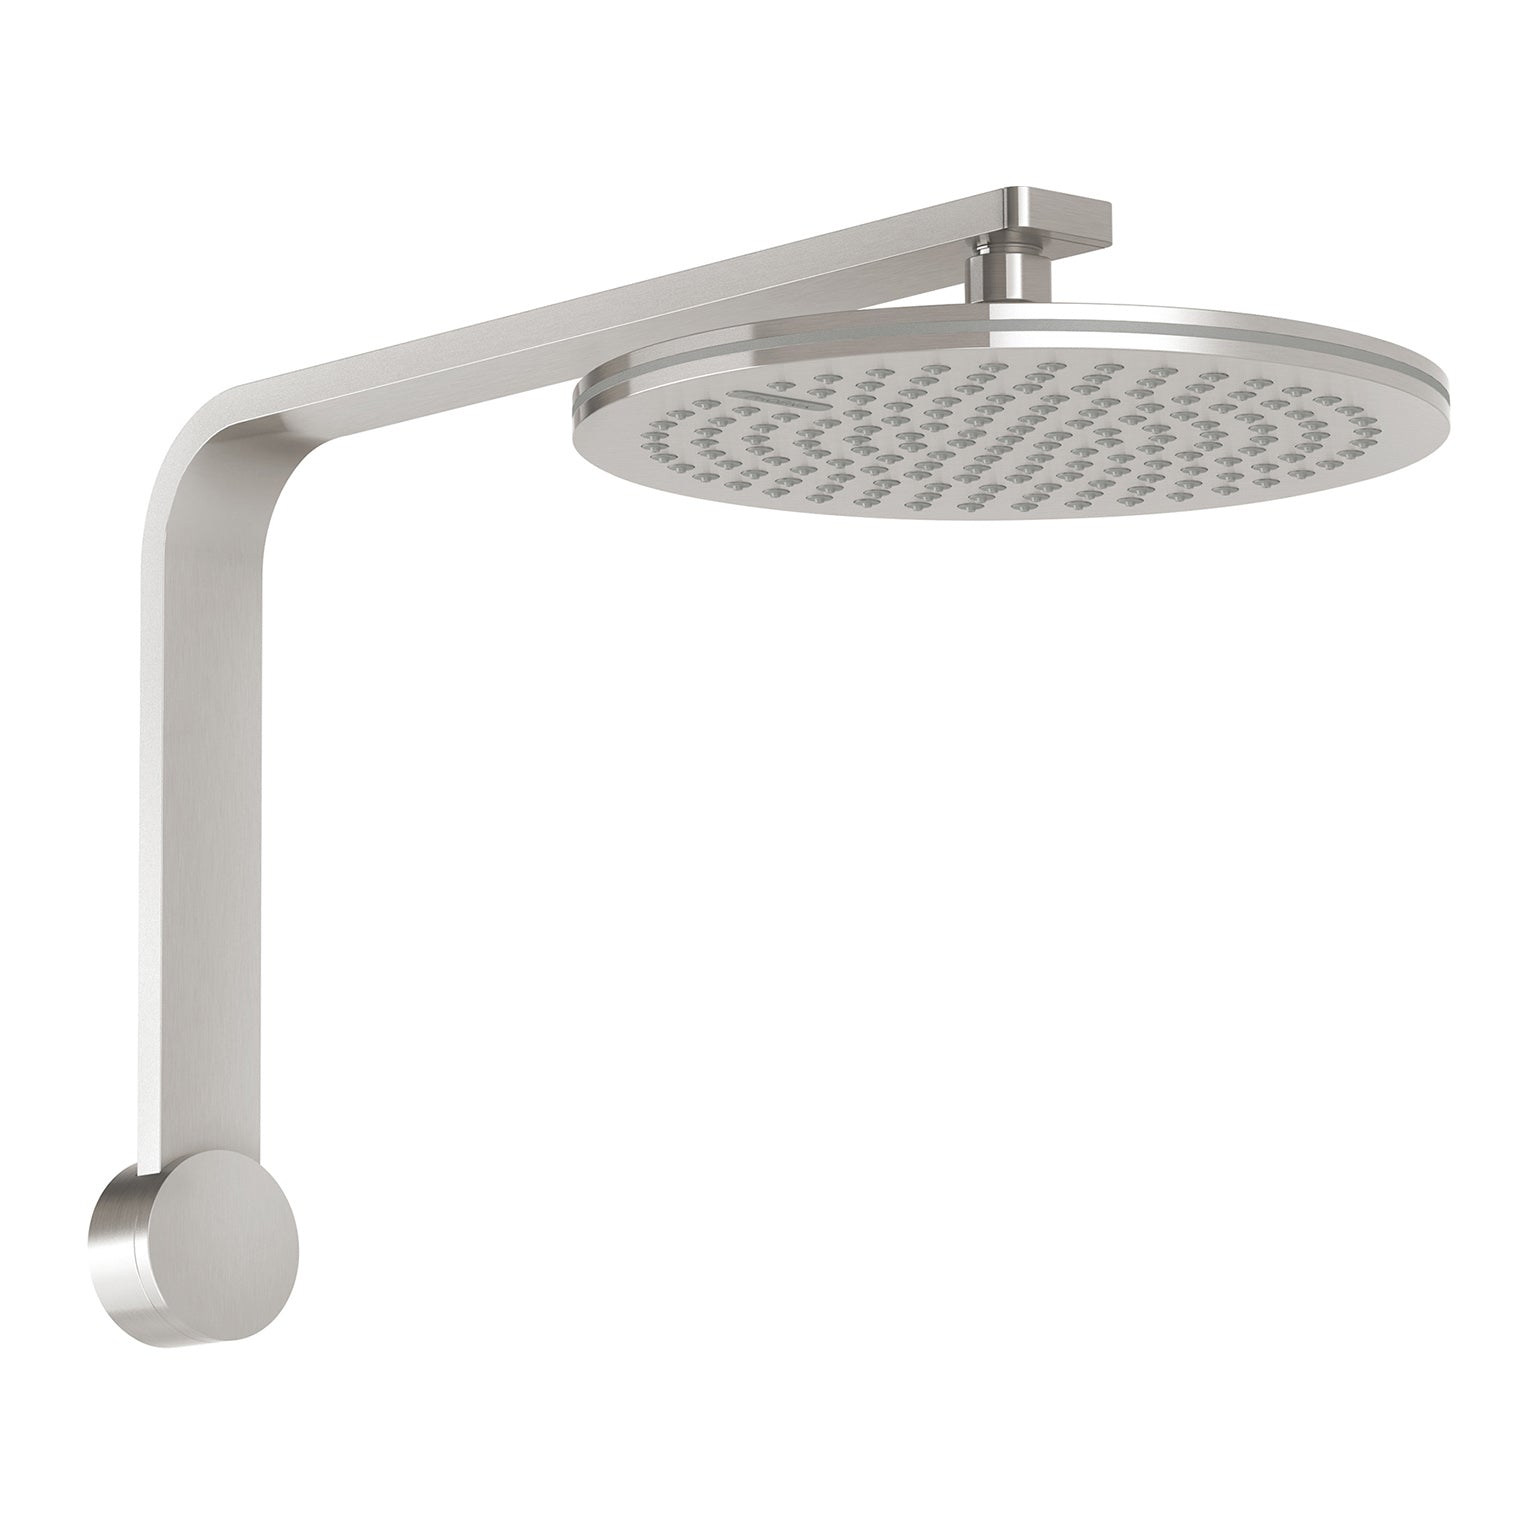 PHOENIX NX QUIL SHOWER ARM AND ROSE BRUSHED NICKEL 250MM